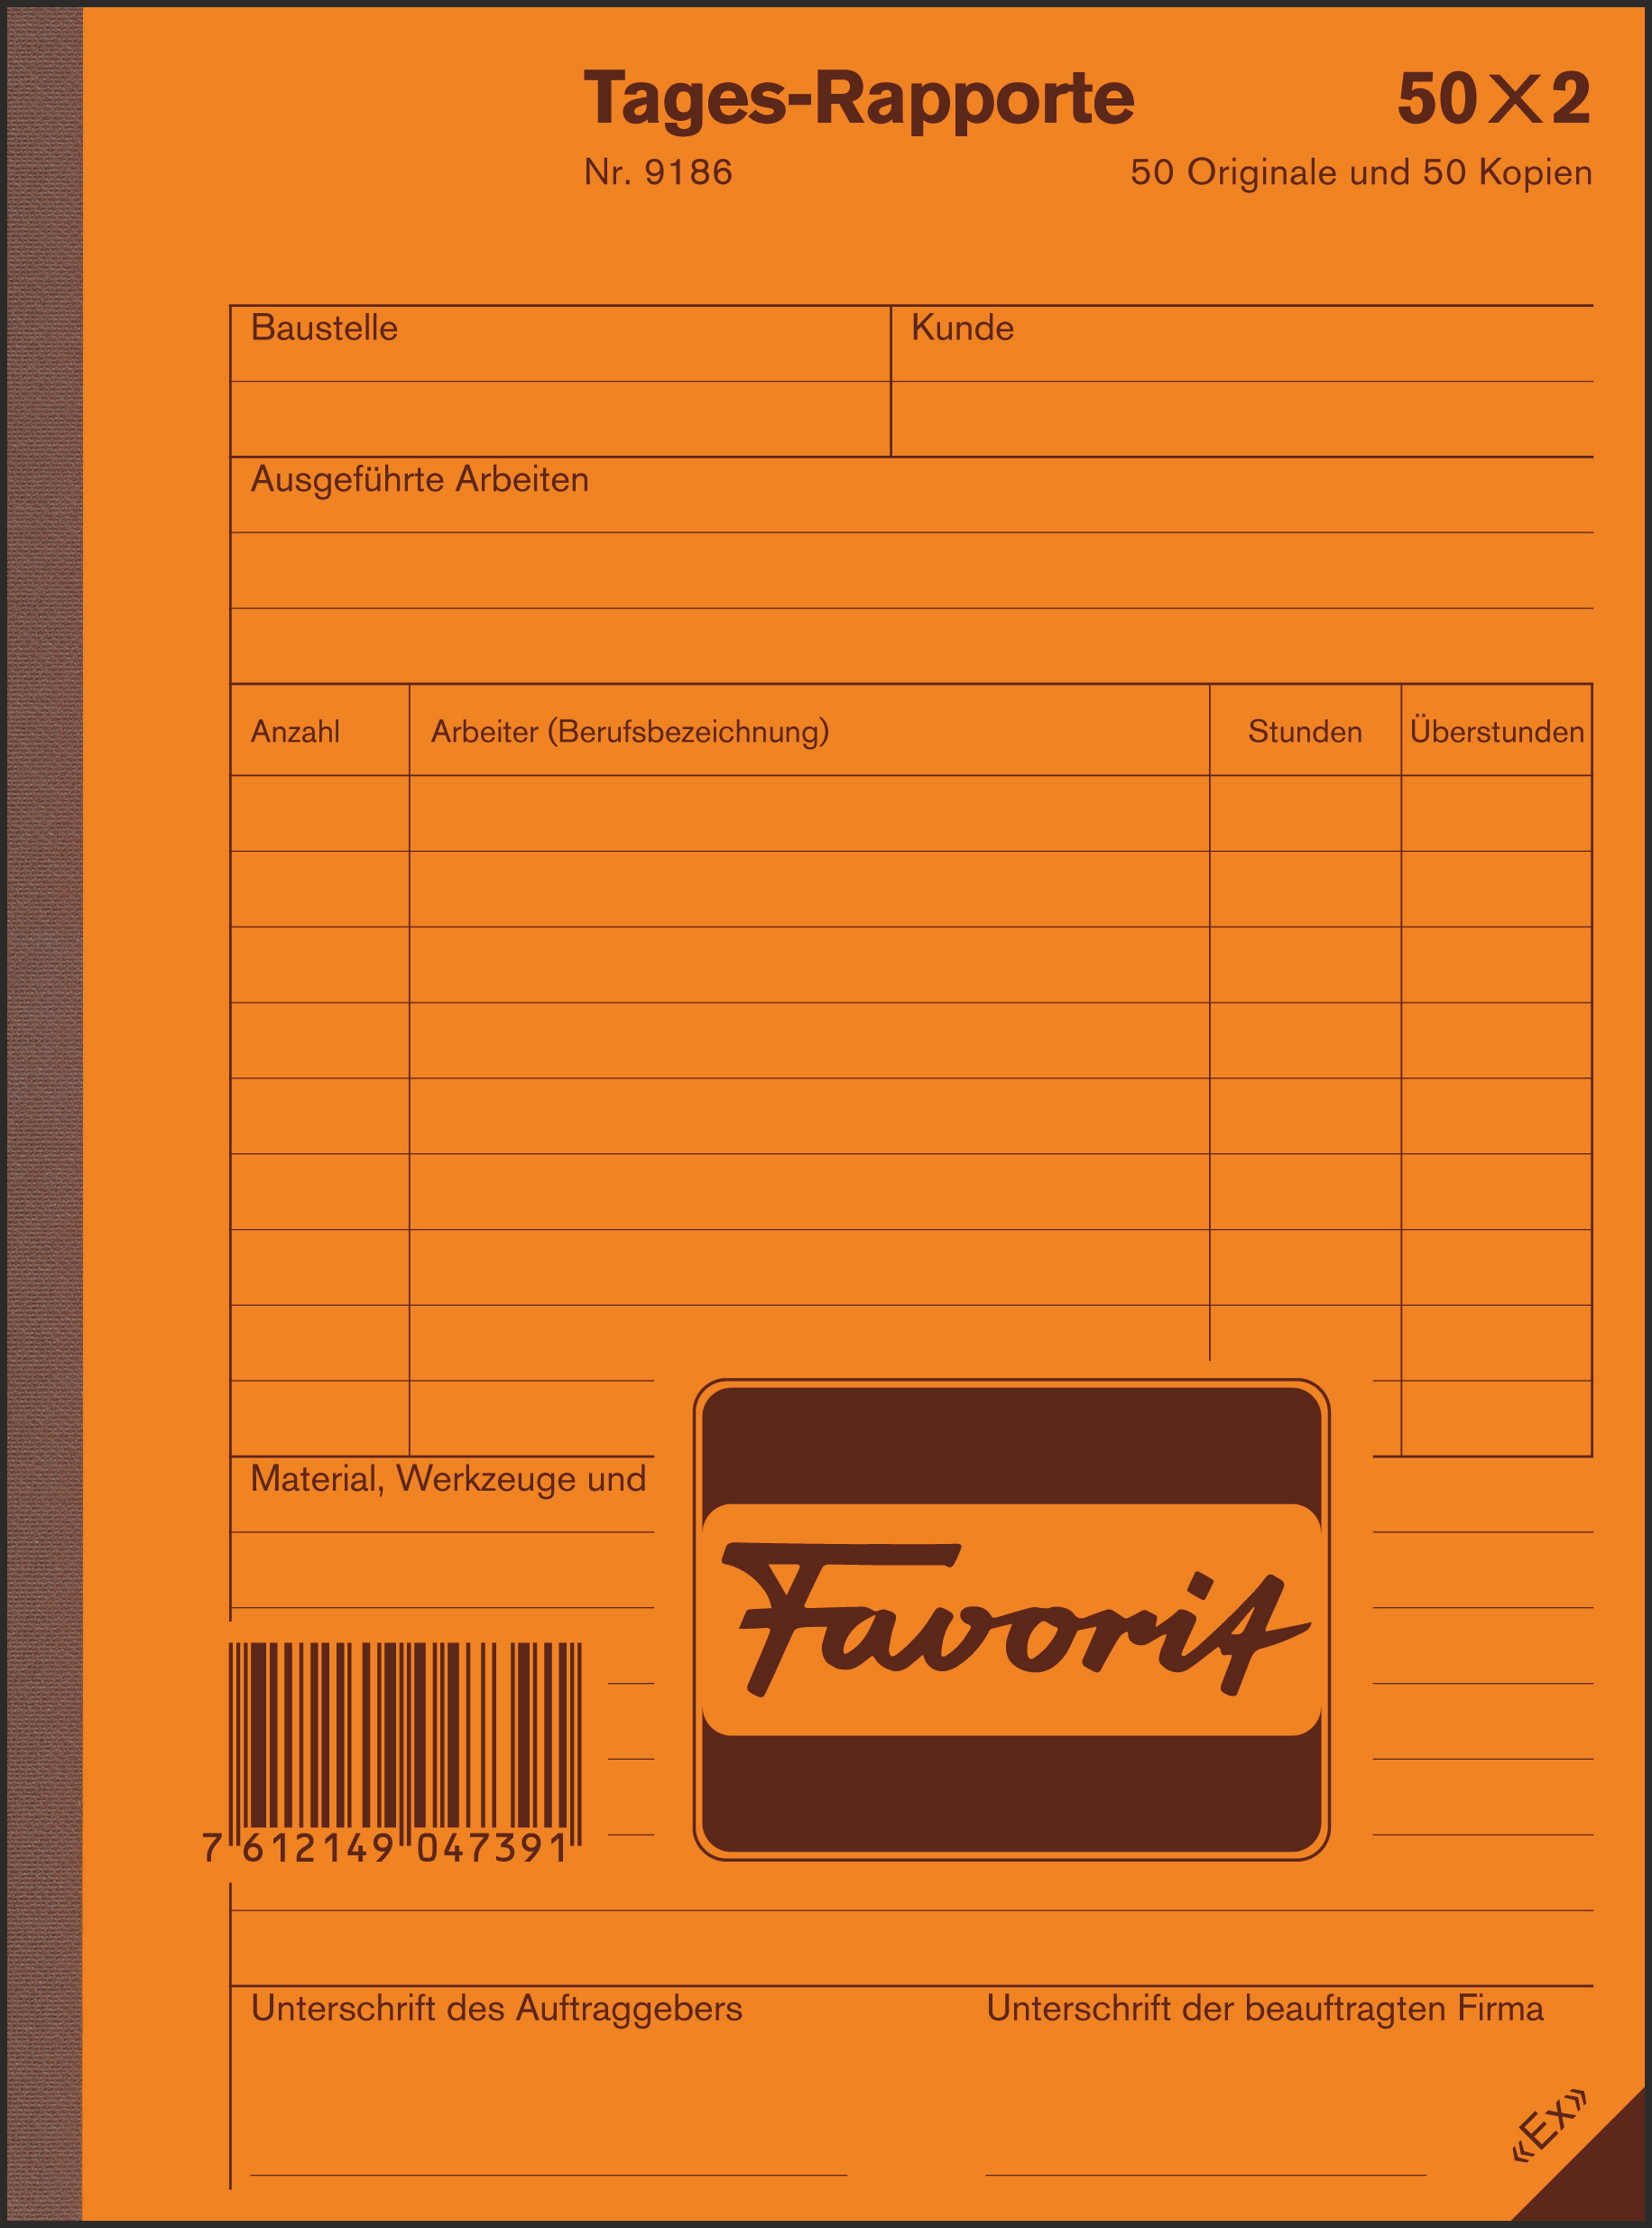 FAVORIT Tages-Rapporte A5 50x2 weiss/weiss mit Kohlepapier<br>